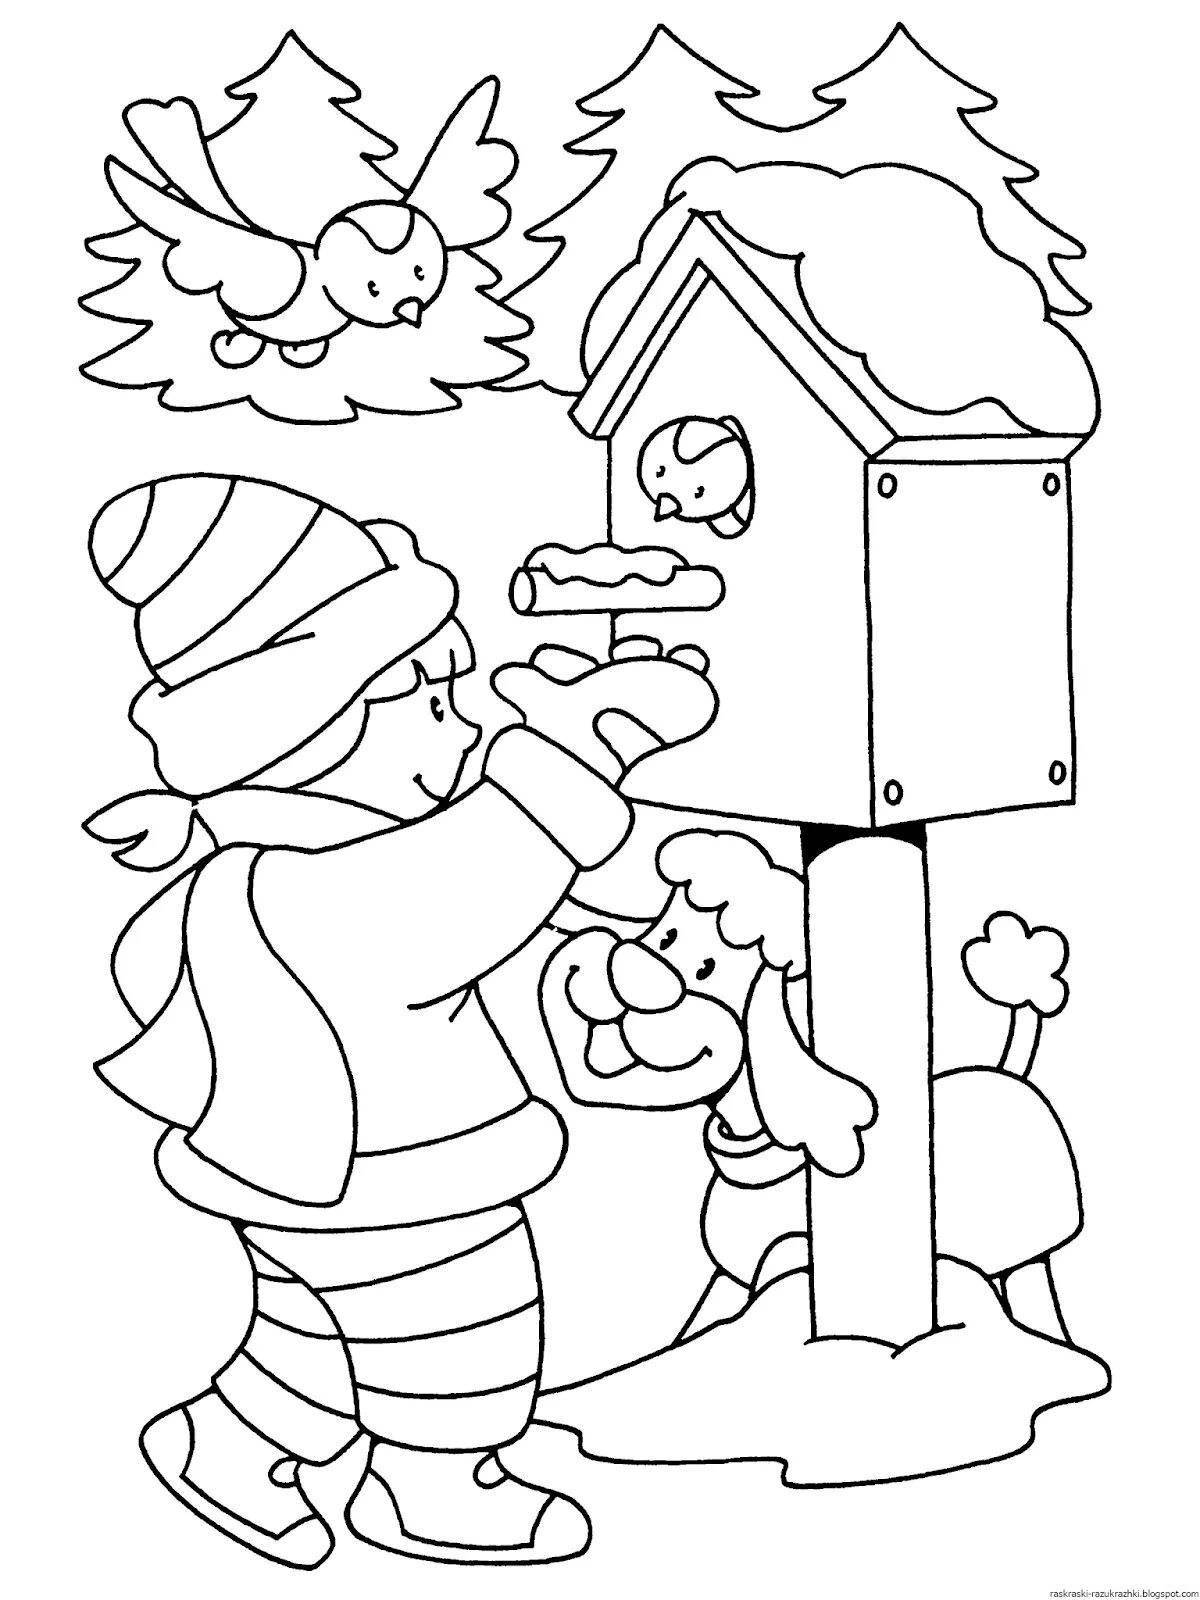 Exquisite winter coloring book for kids 6-7 years old